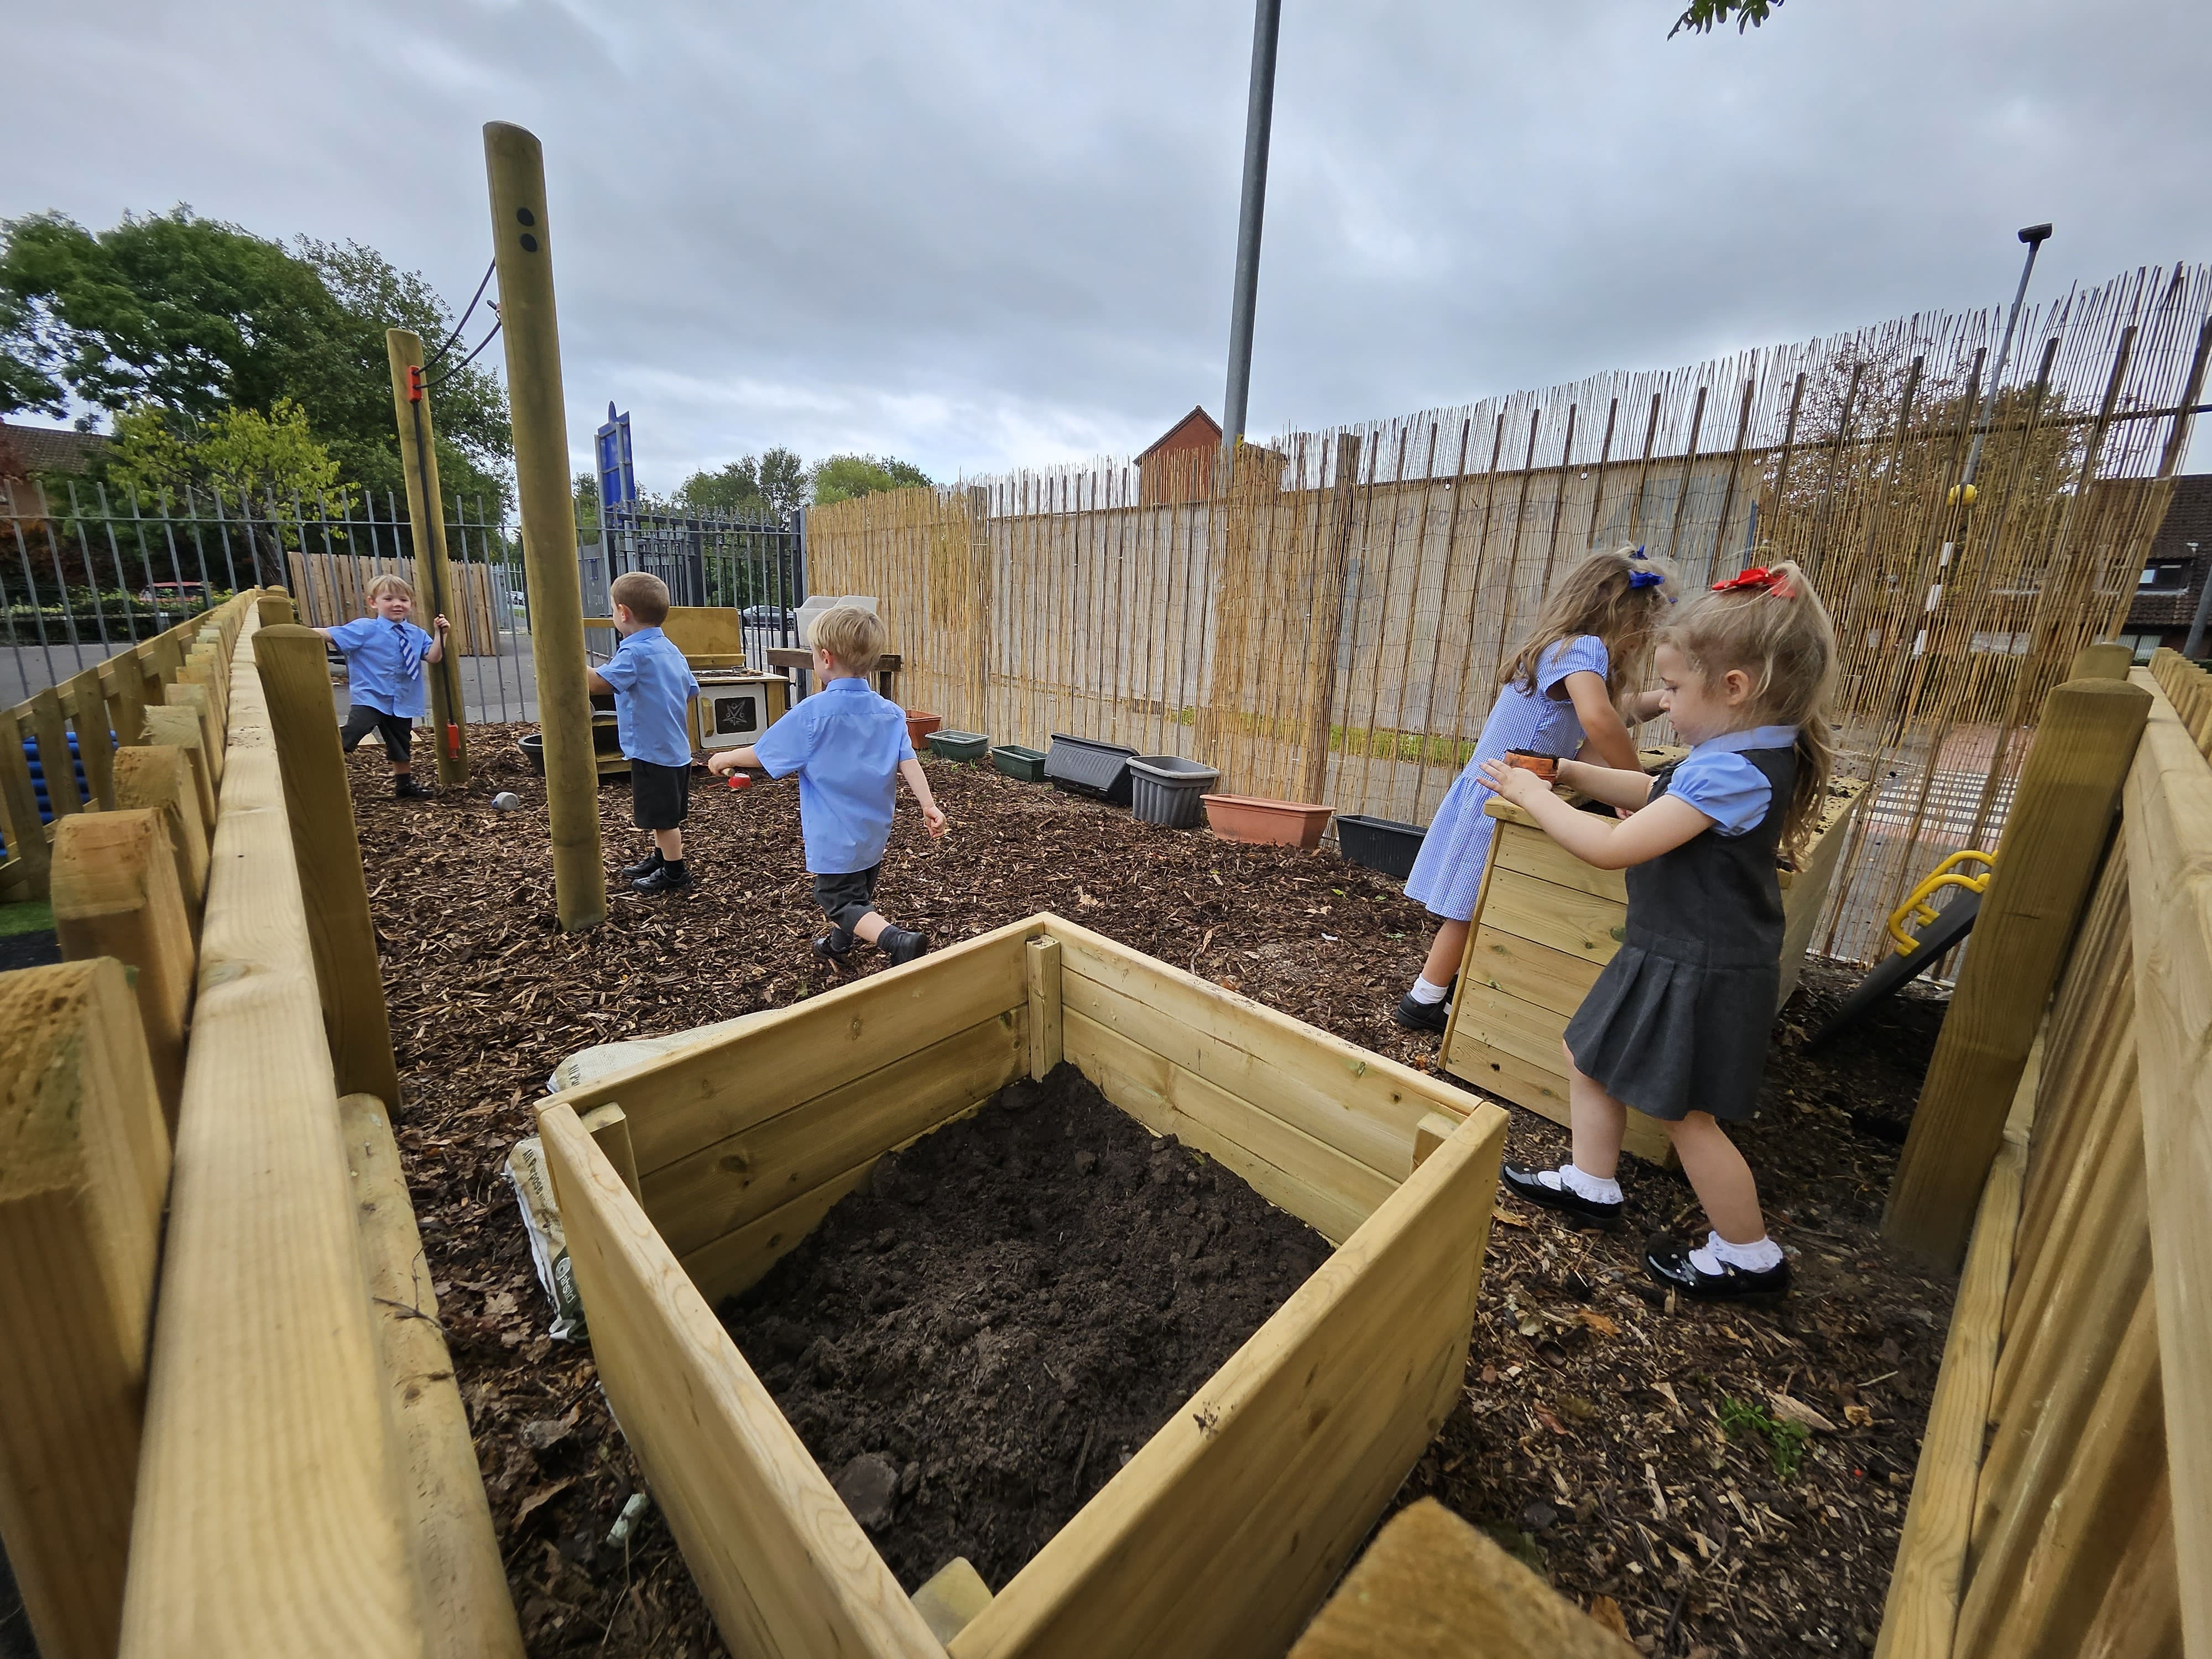 5 Children are walking around the messy area which has been built by Pentagon Play. 2 Planters are full of mud and there's a pulley and mud kitchen on the other side of the area. The children are playing with all the equipment as they engage in messy play.